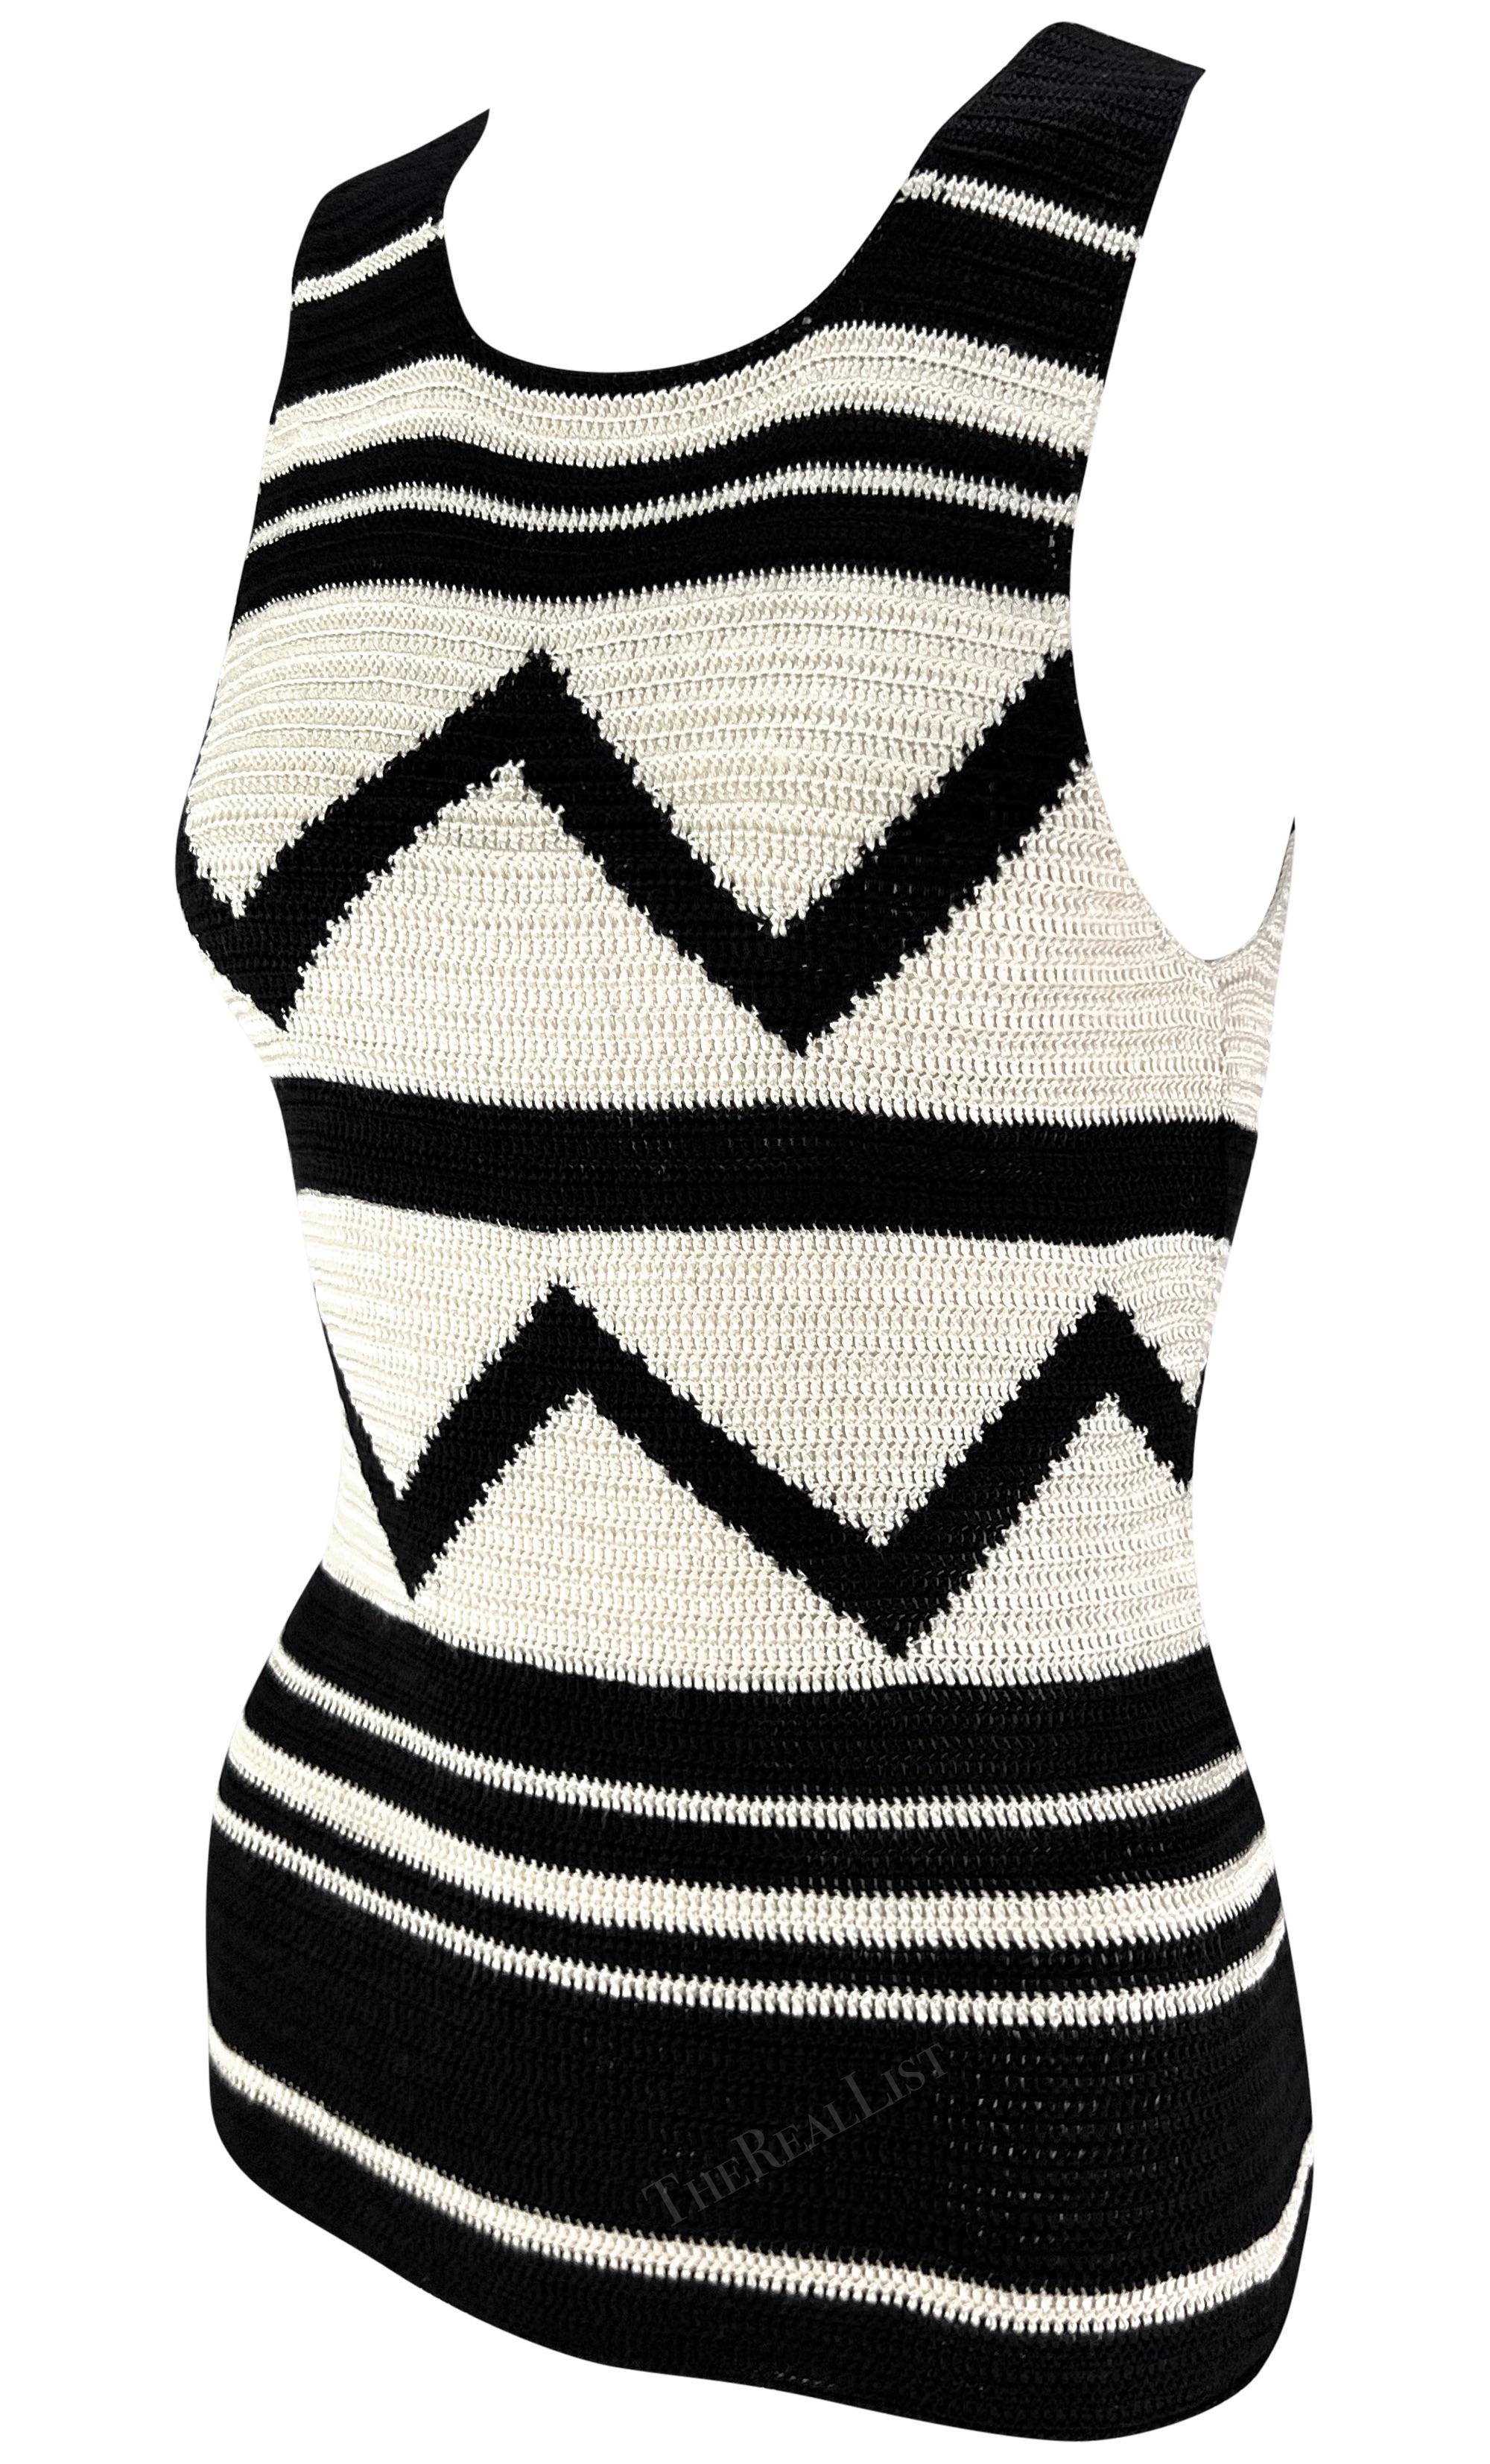 S/S 2001 Ralph Lauren Runway Creme Black Geometric Sheer Knit Silk Sweater Top In Excellent Condition For Sale In West Hollywood, CA